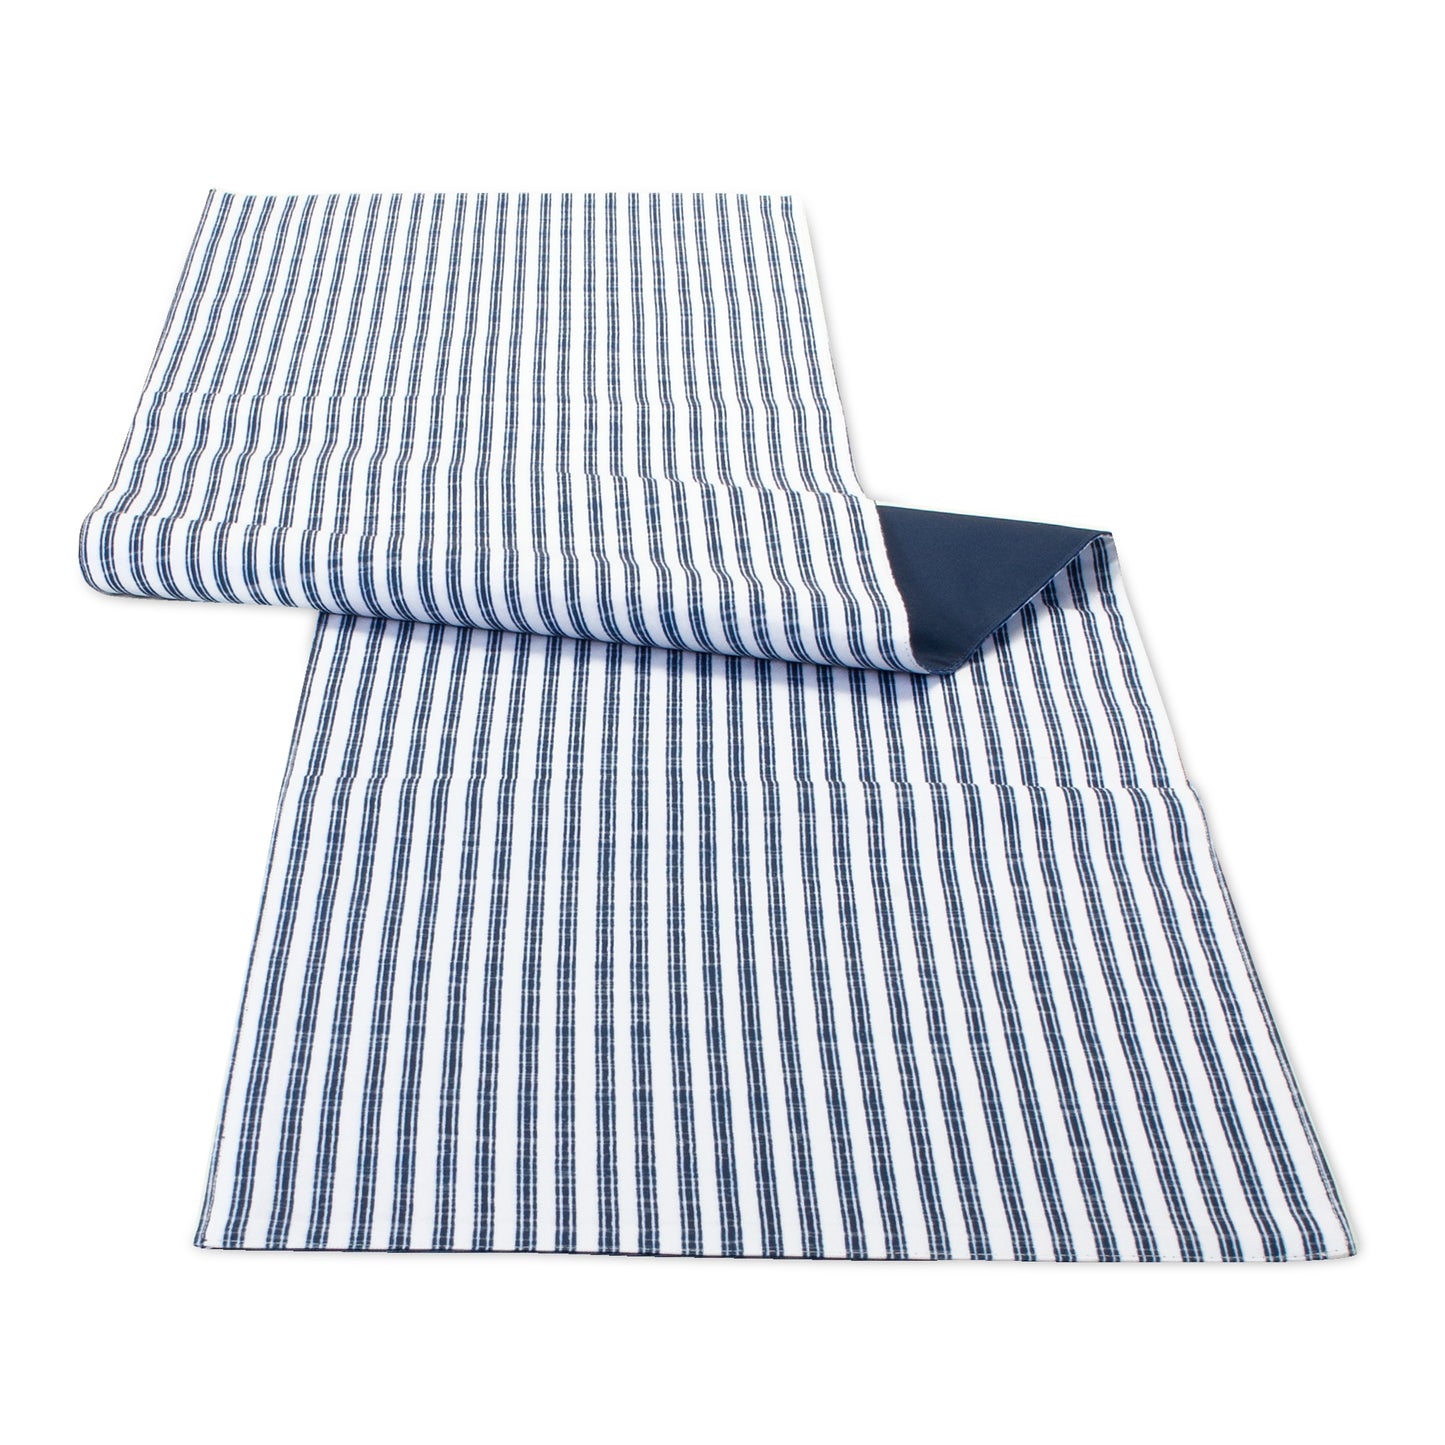 Blue and White Striped Dining Table Runner 70"L